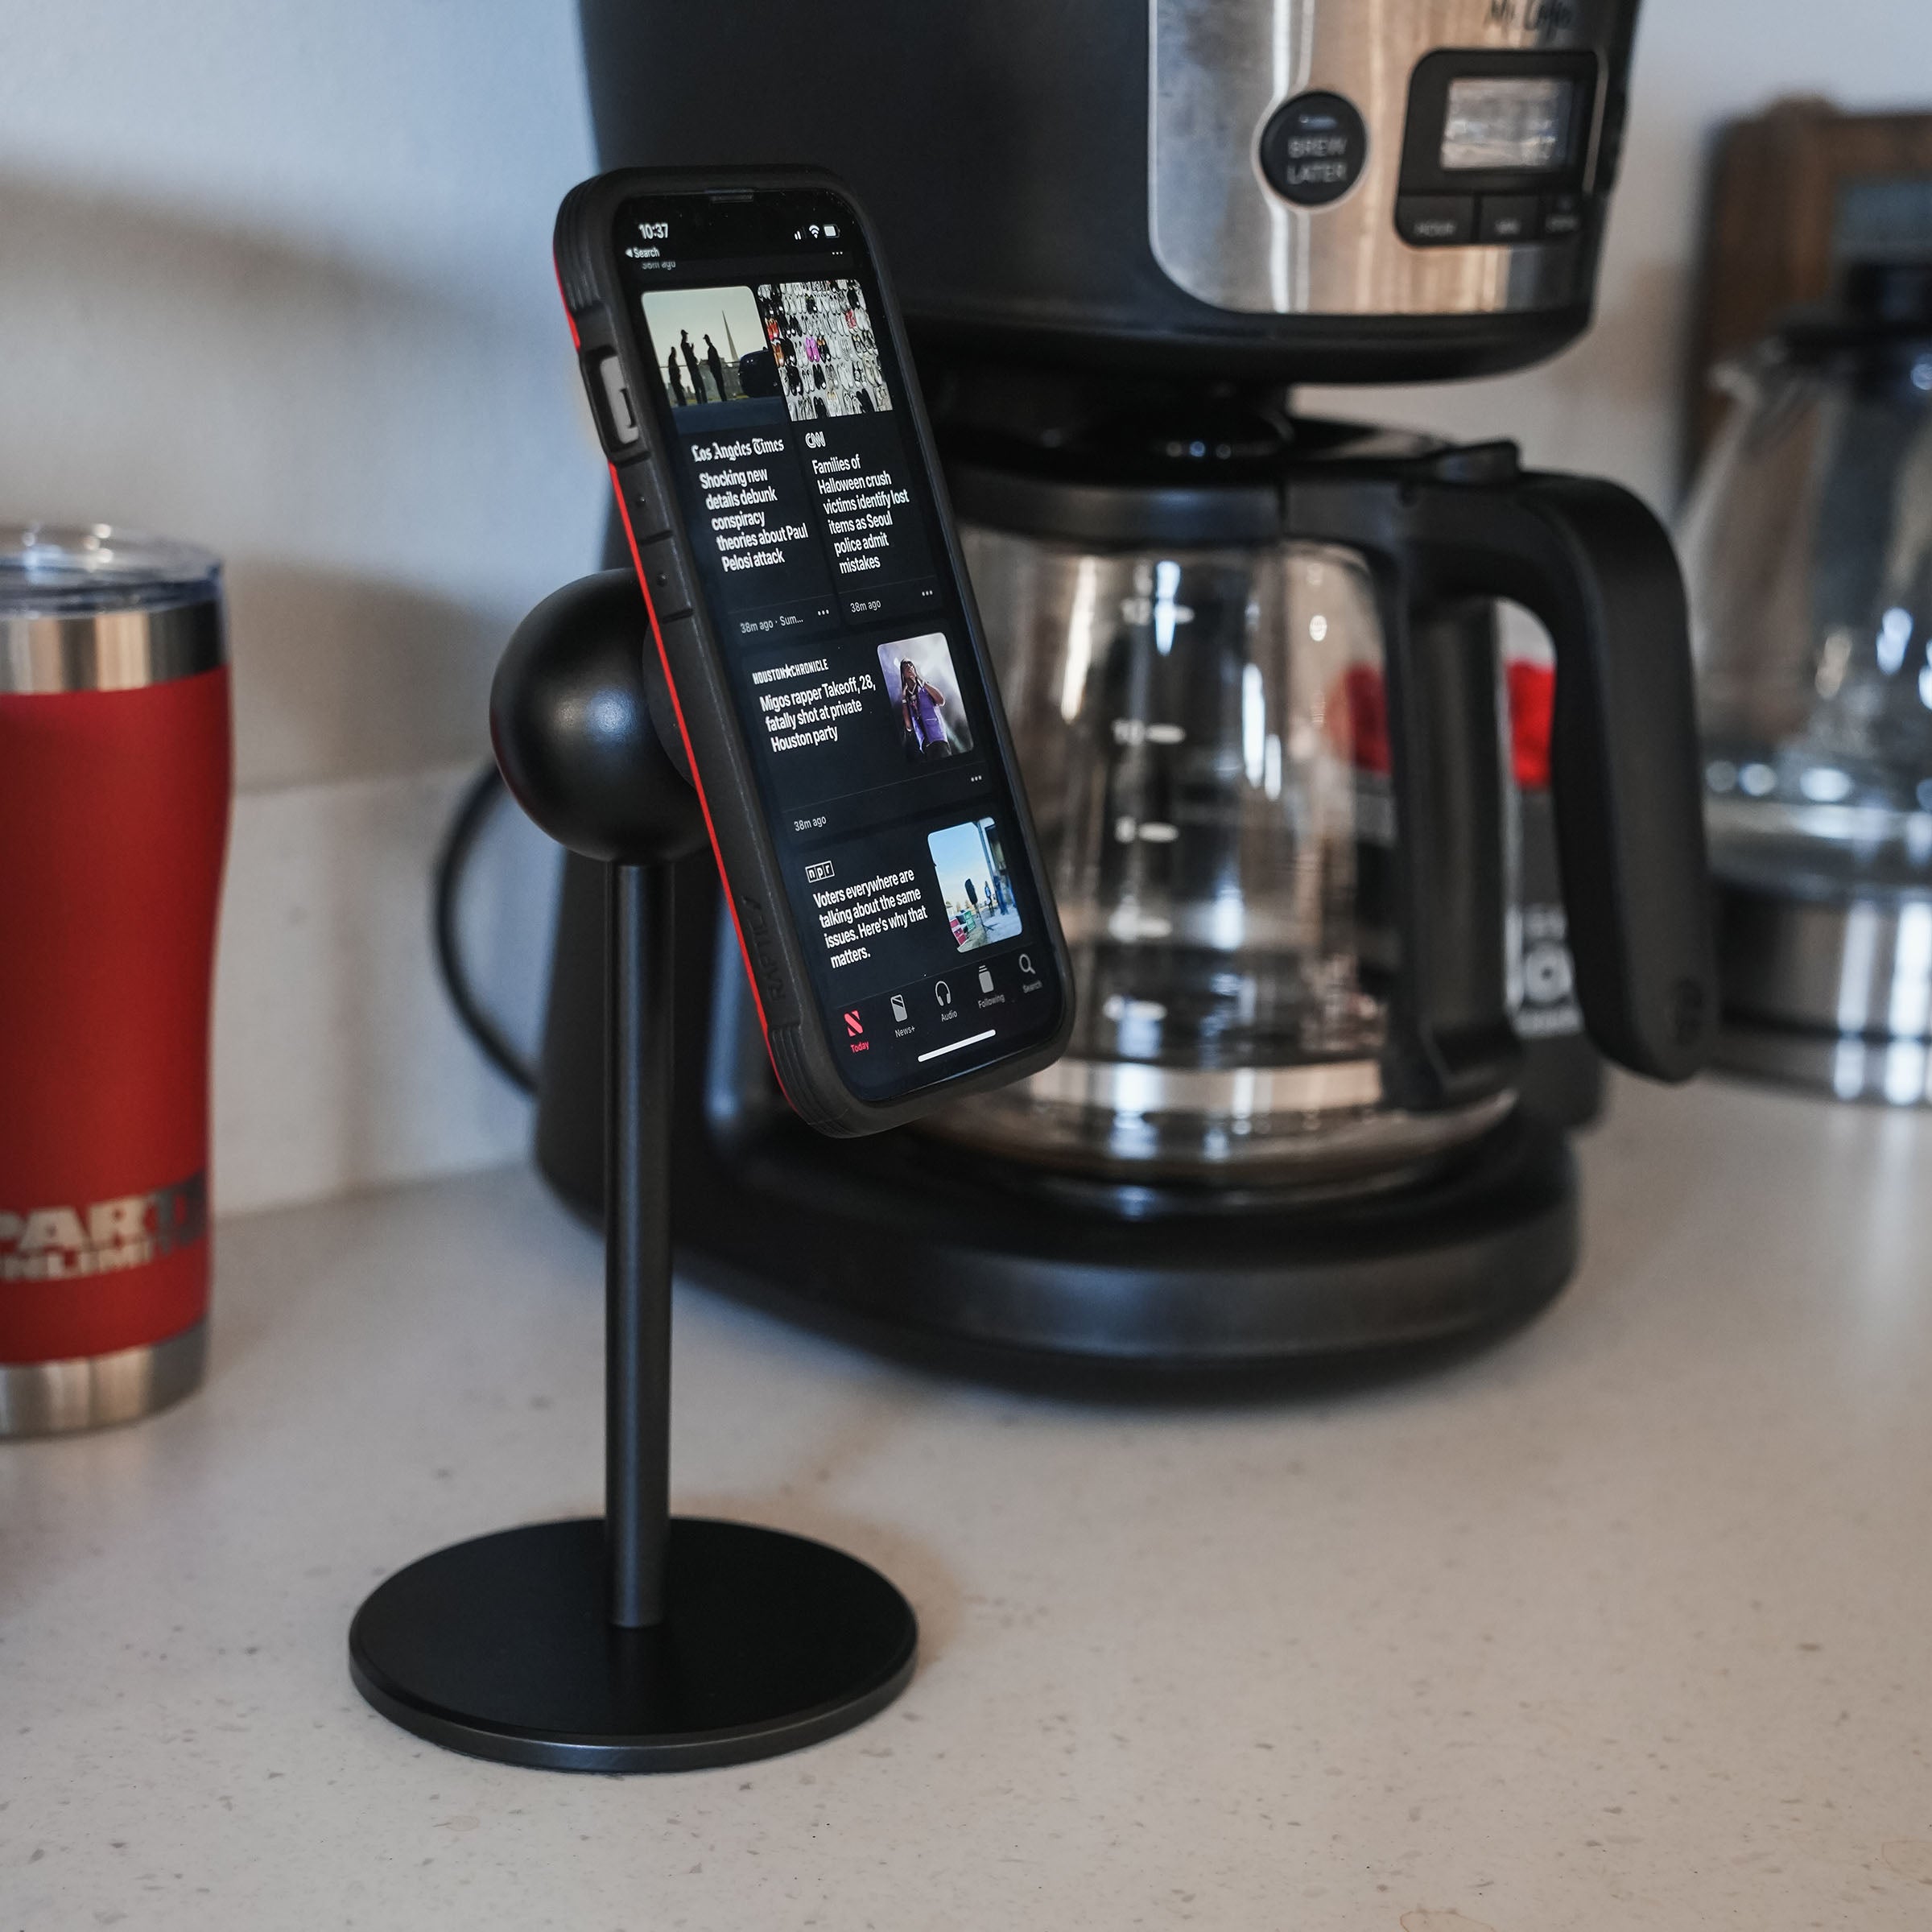 Black Satin iOMini Magnetic Phone Mount with Phone (iOmini - Black Satin with iPhone)